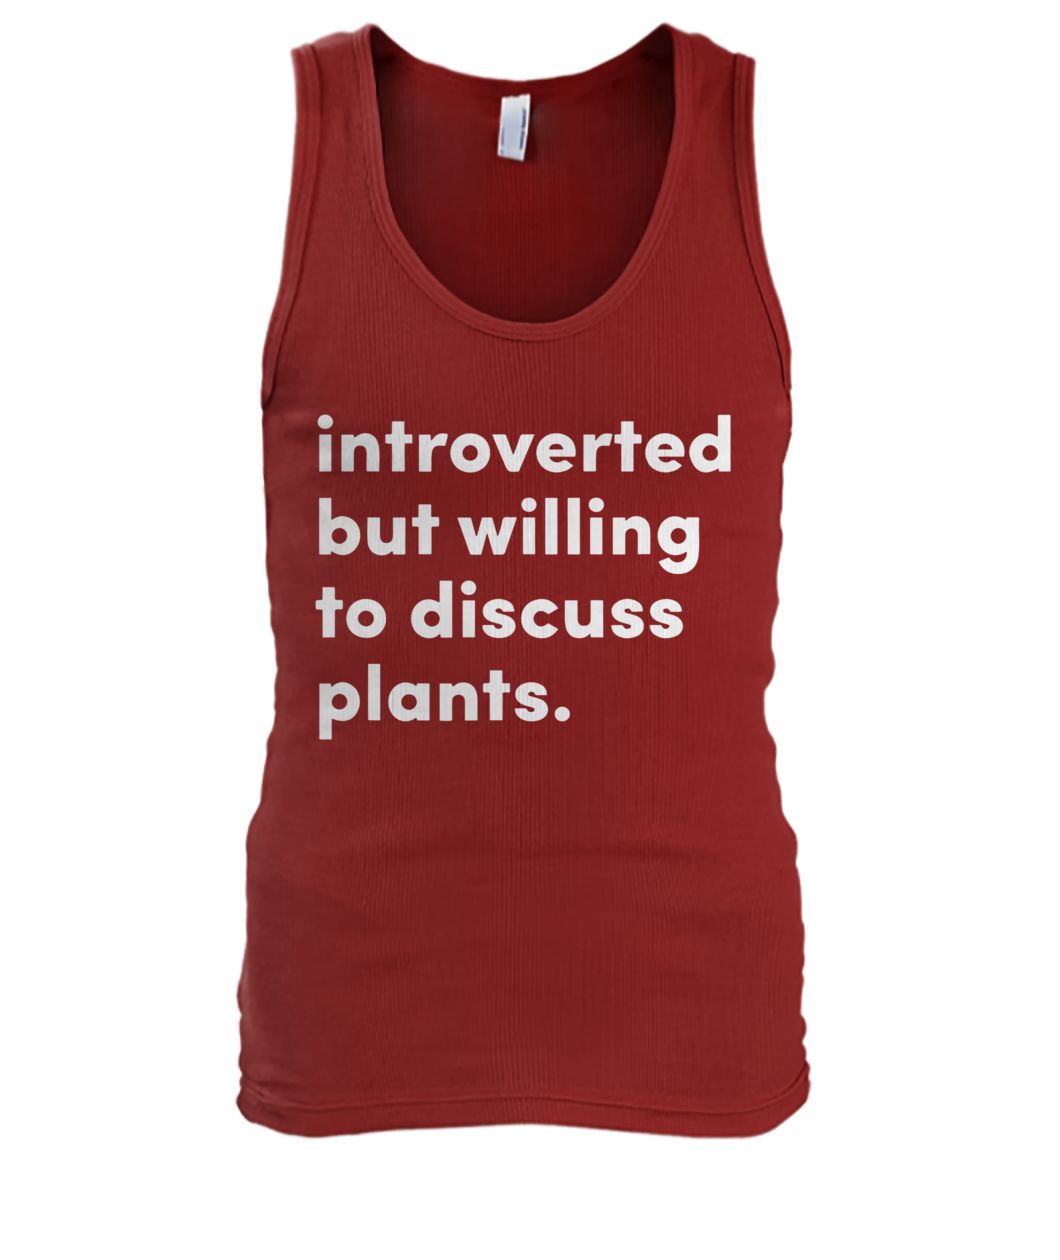 Introverted but willing to discuss plants men's tank top